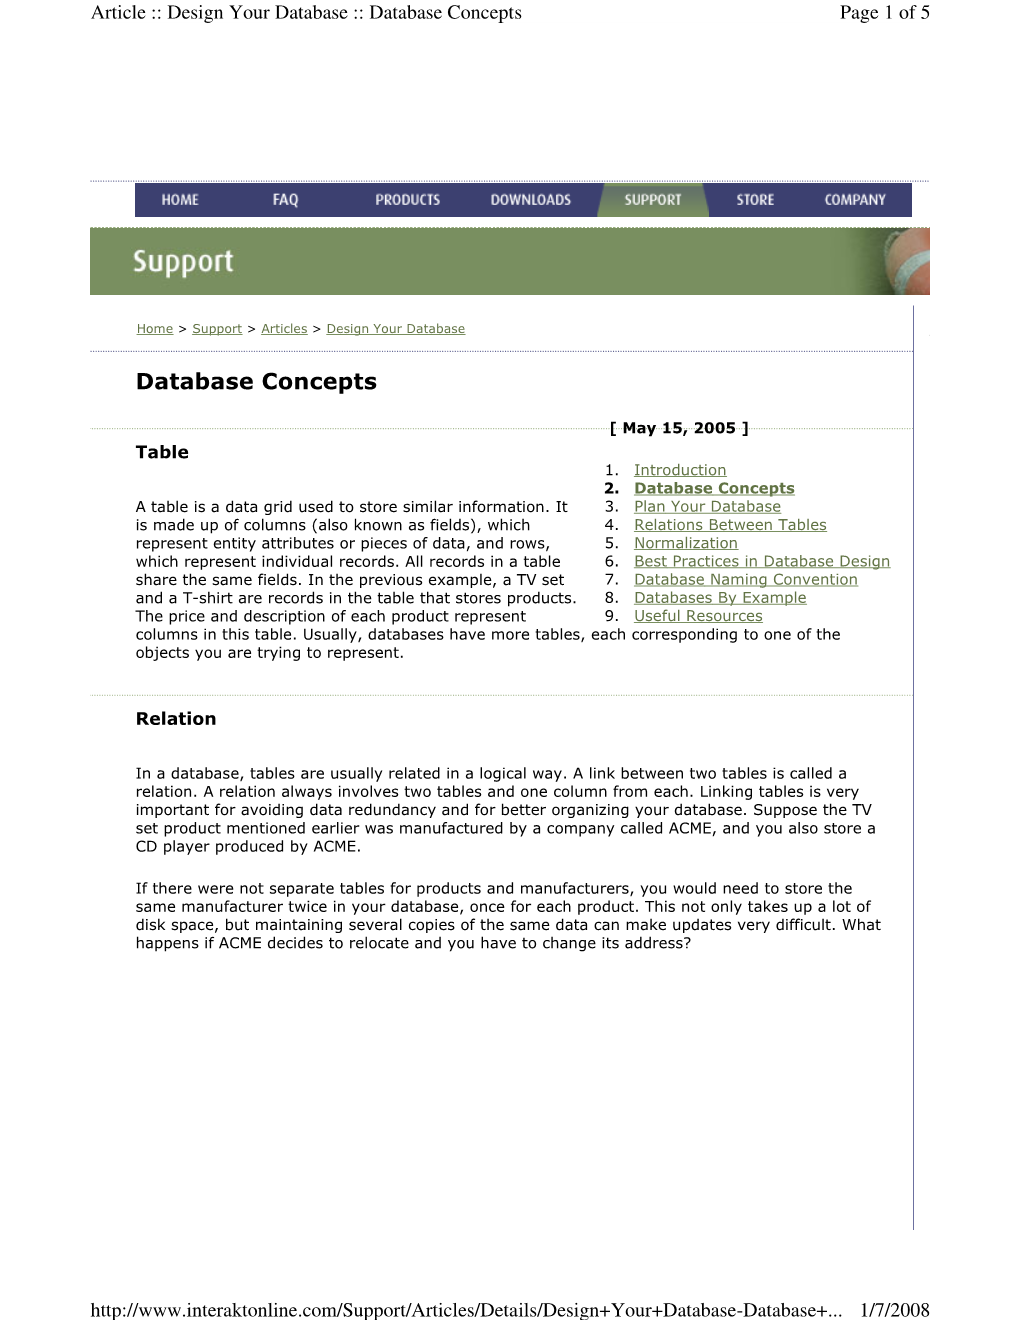 Database Concepts Page 1 of 5